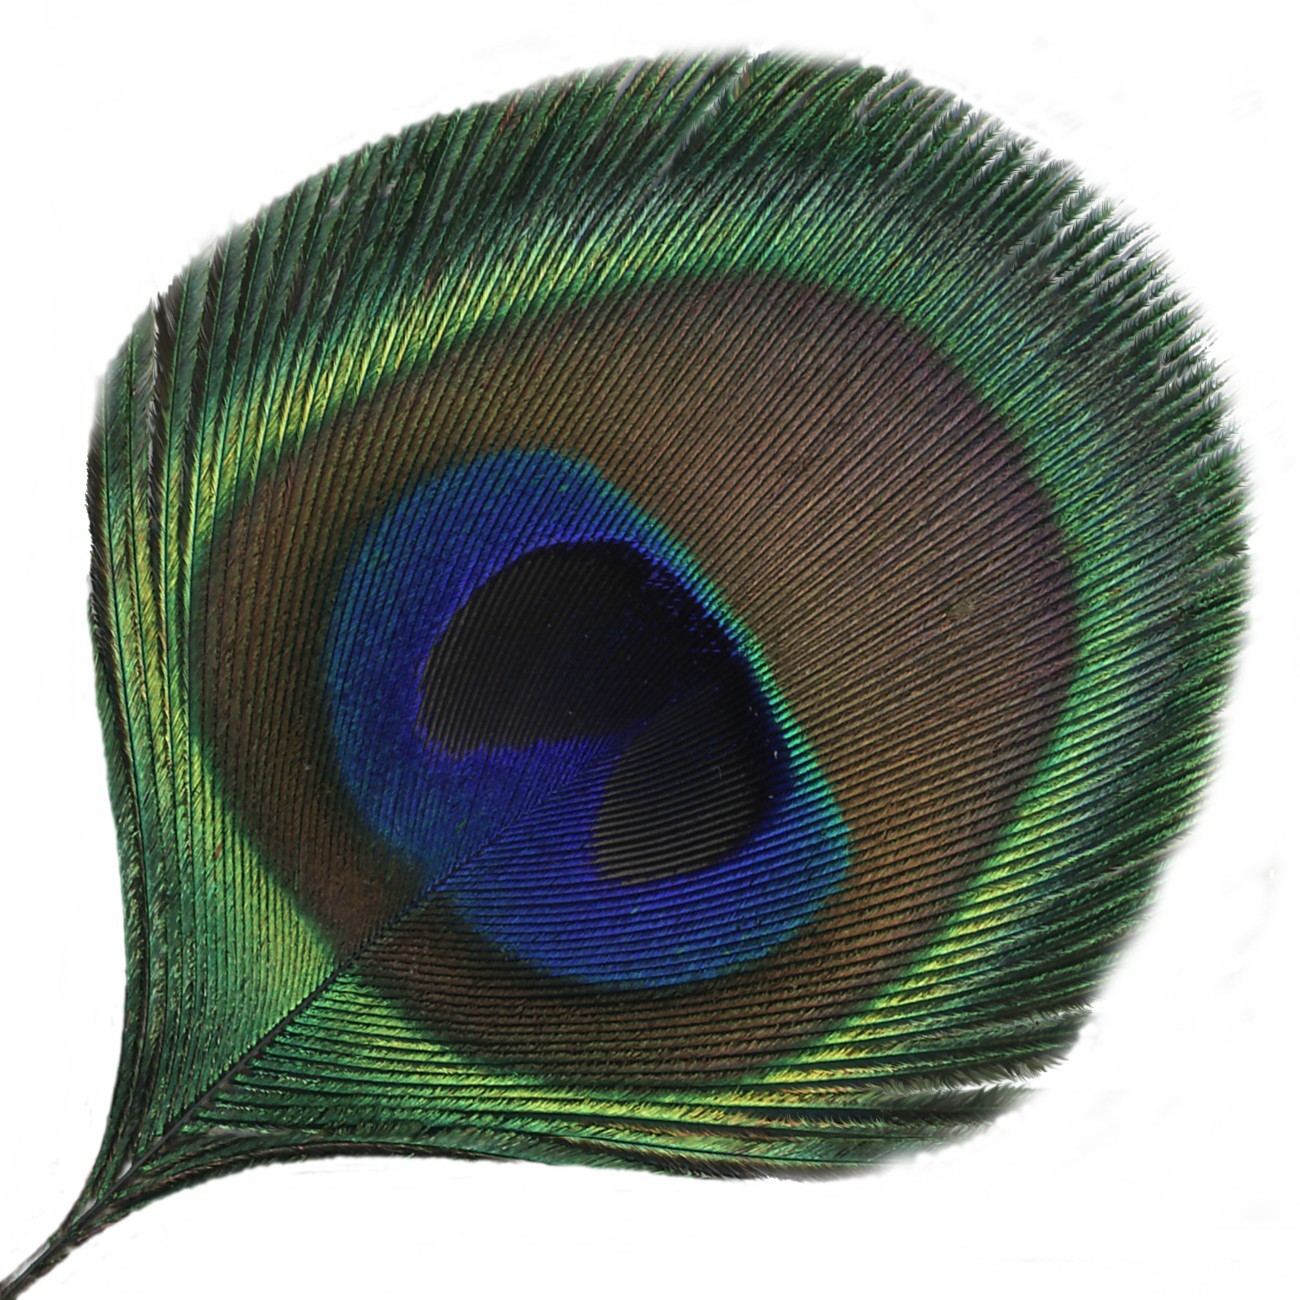 Pavonis peacock quill